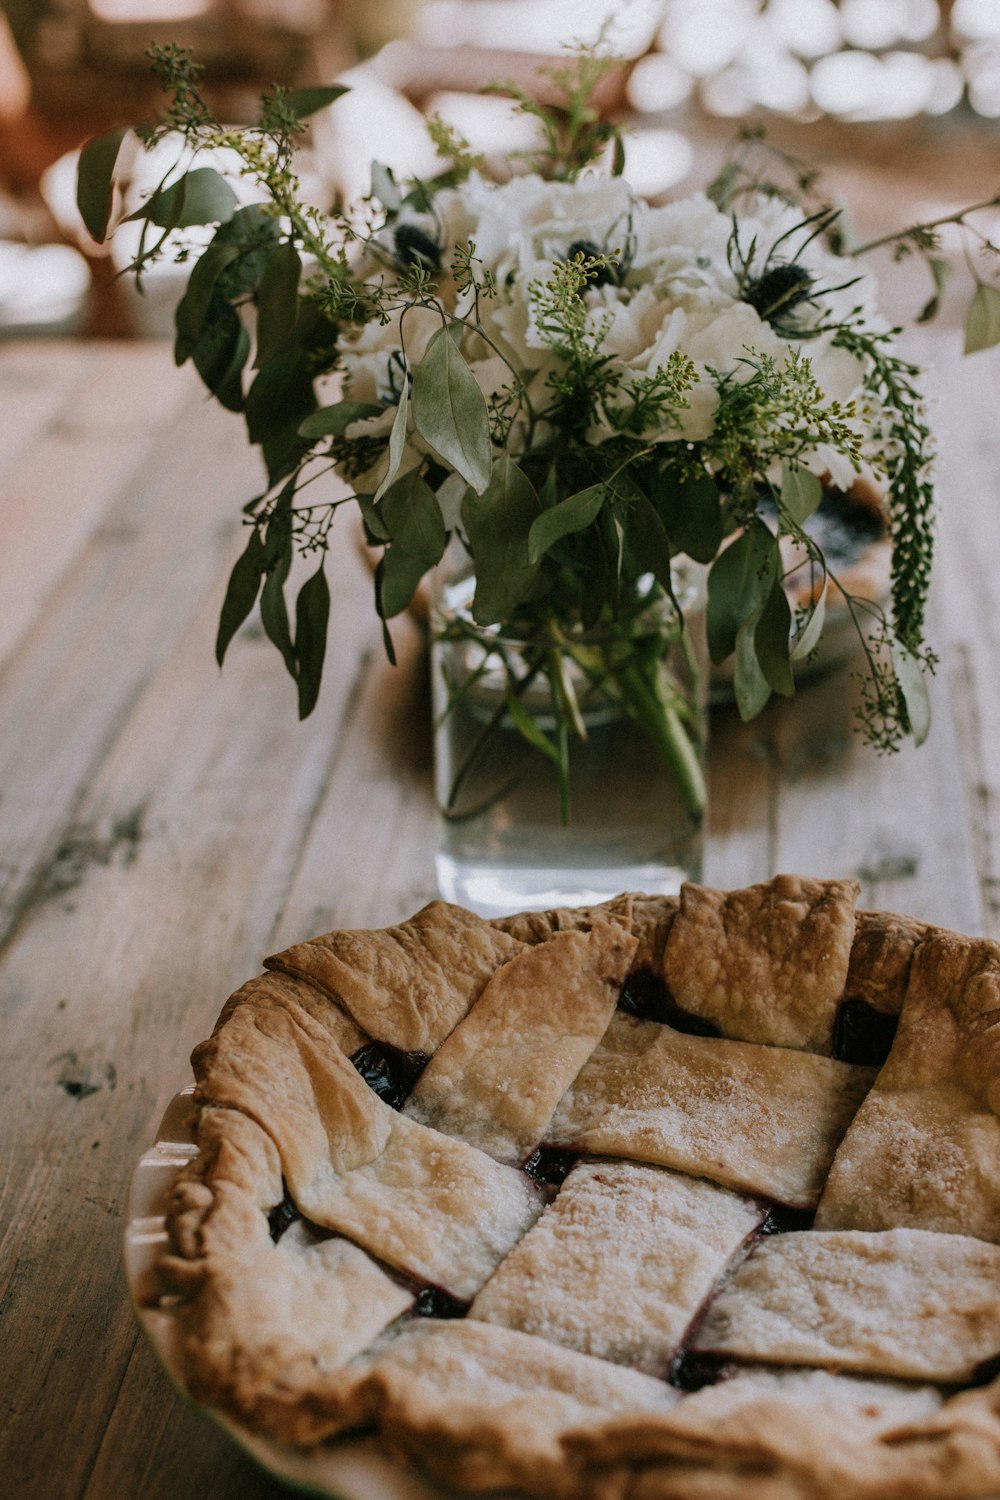 selective focus photography of baked bread beside white petaled flower